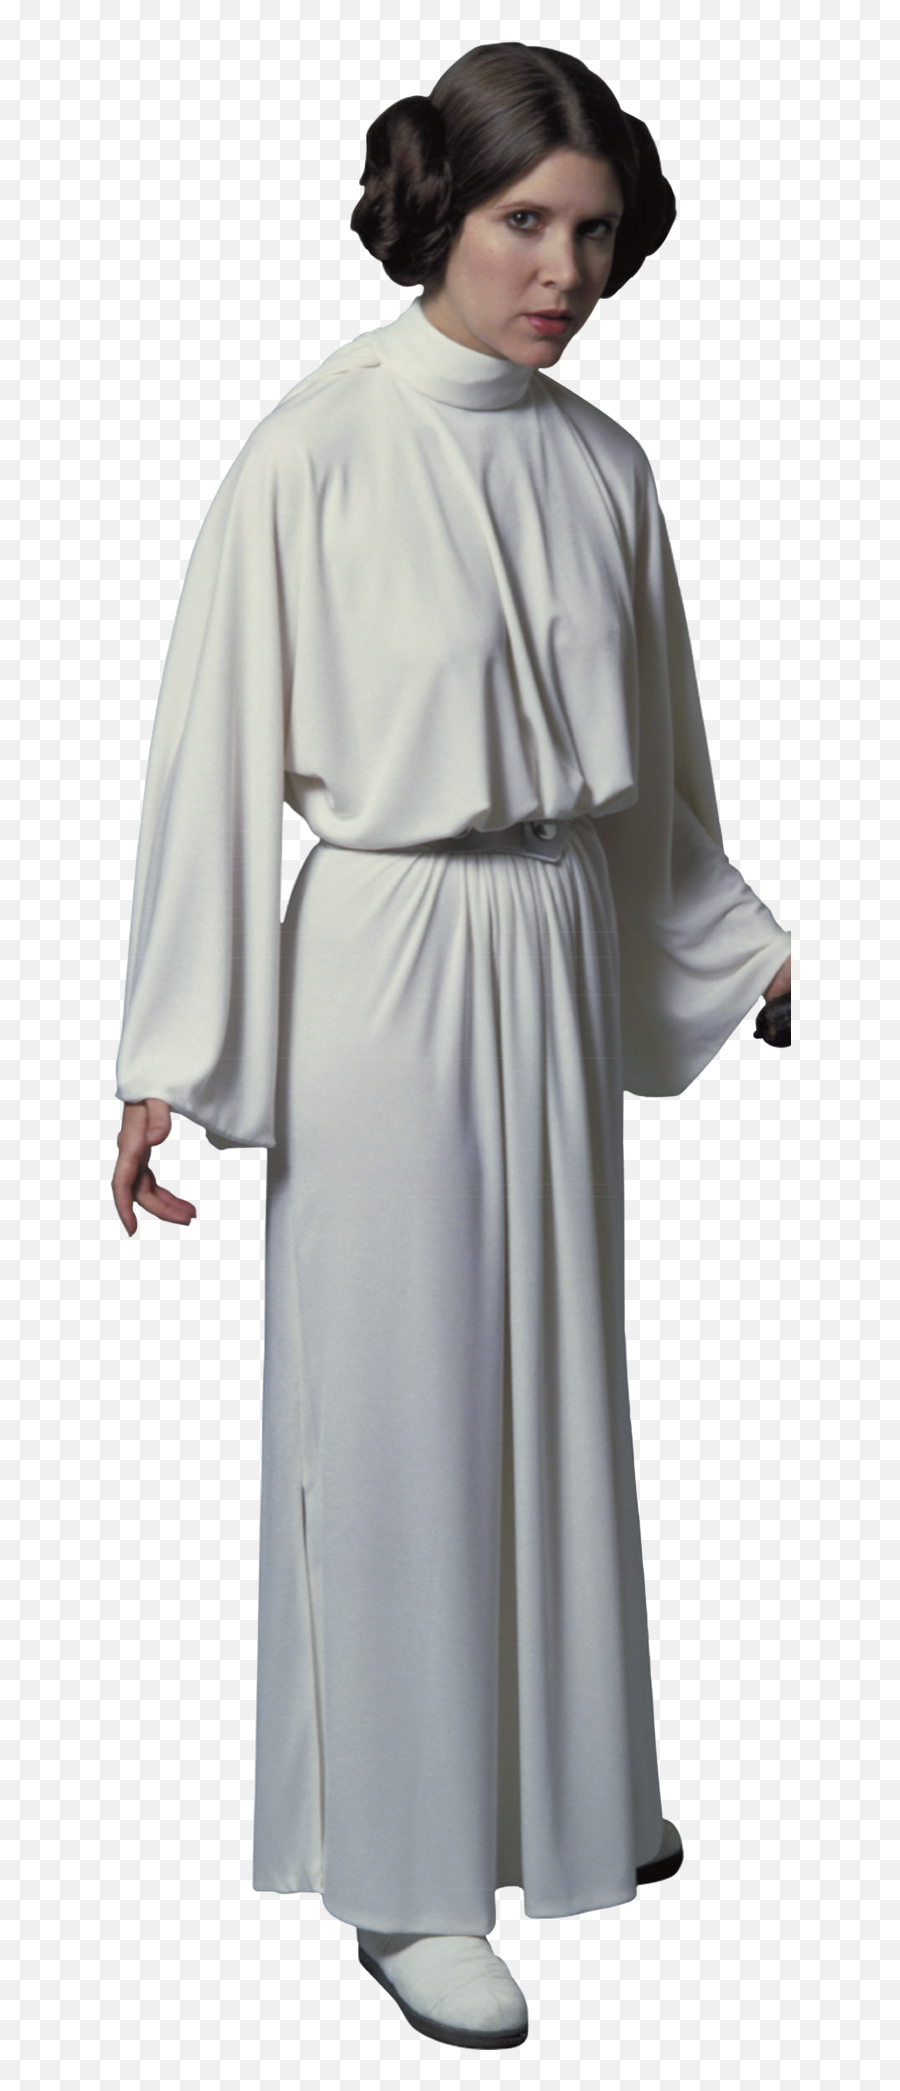 Leia Png 8 Image - Gown,Leia Png